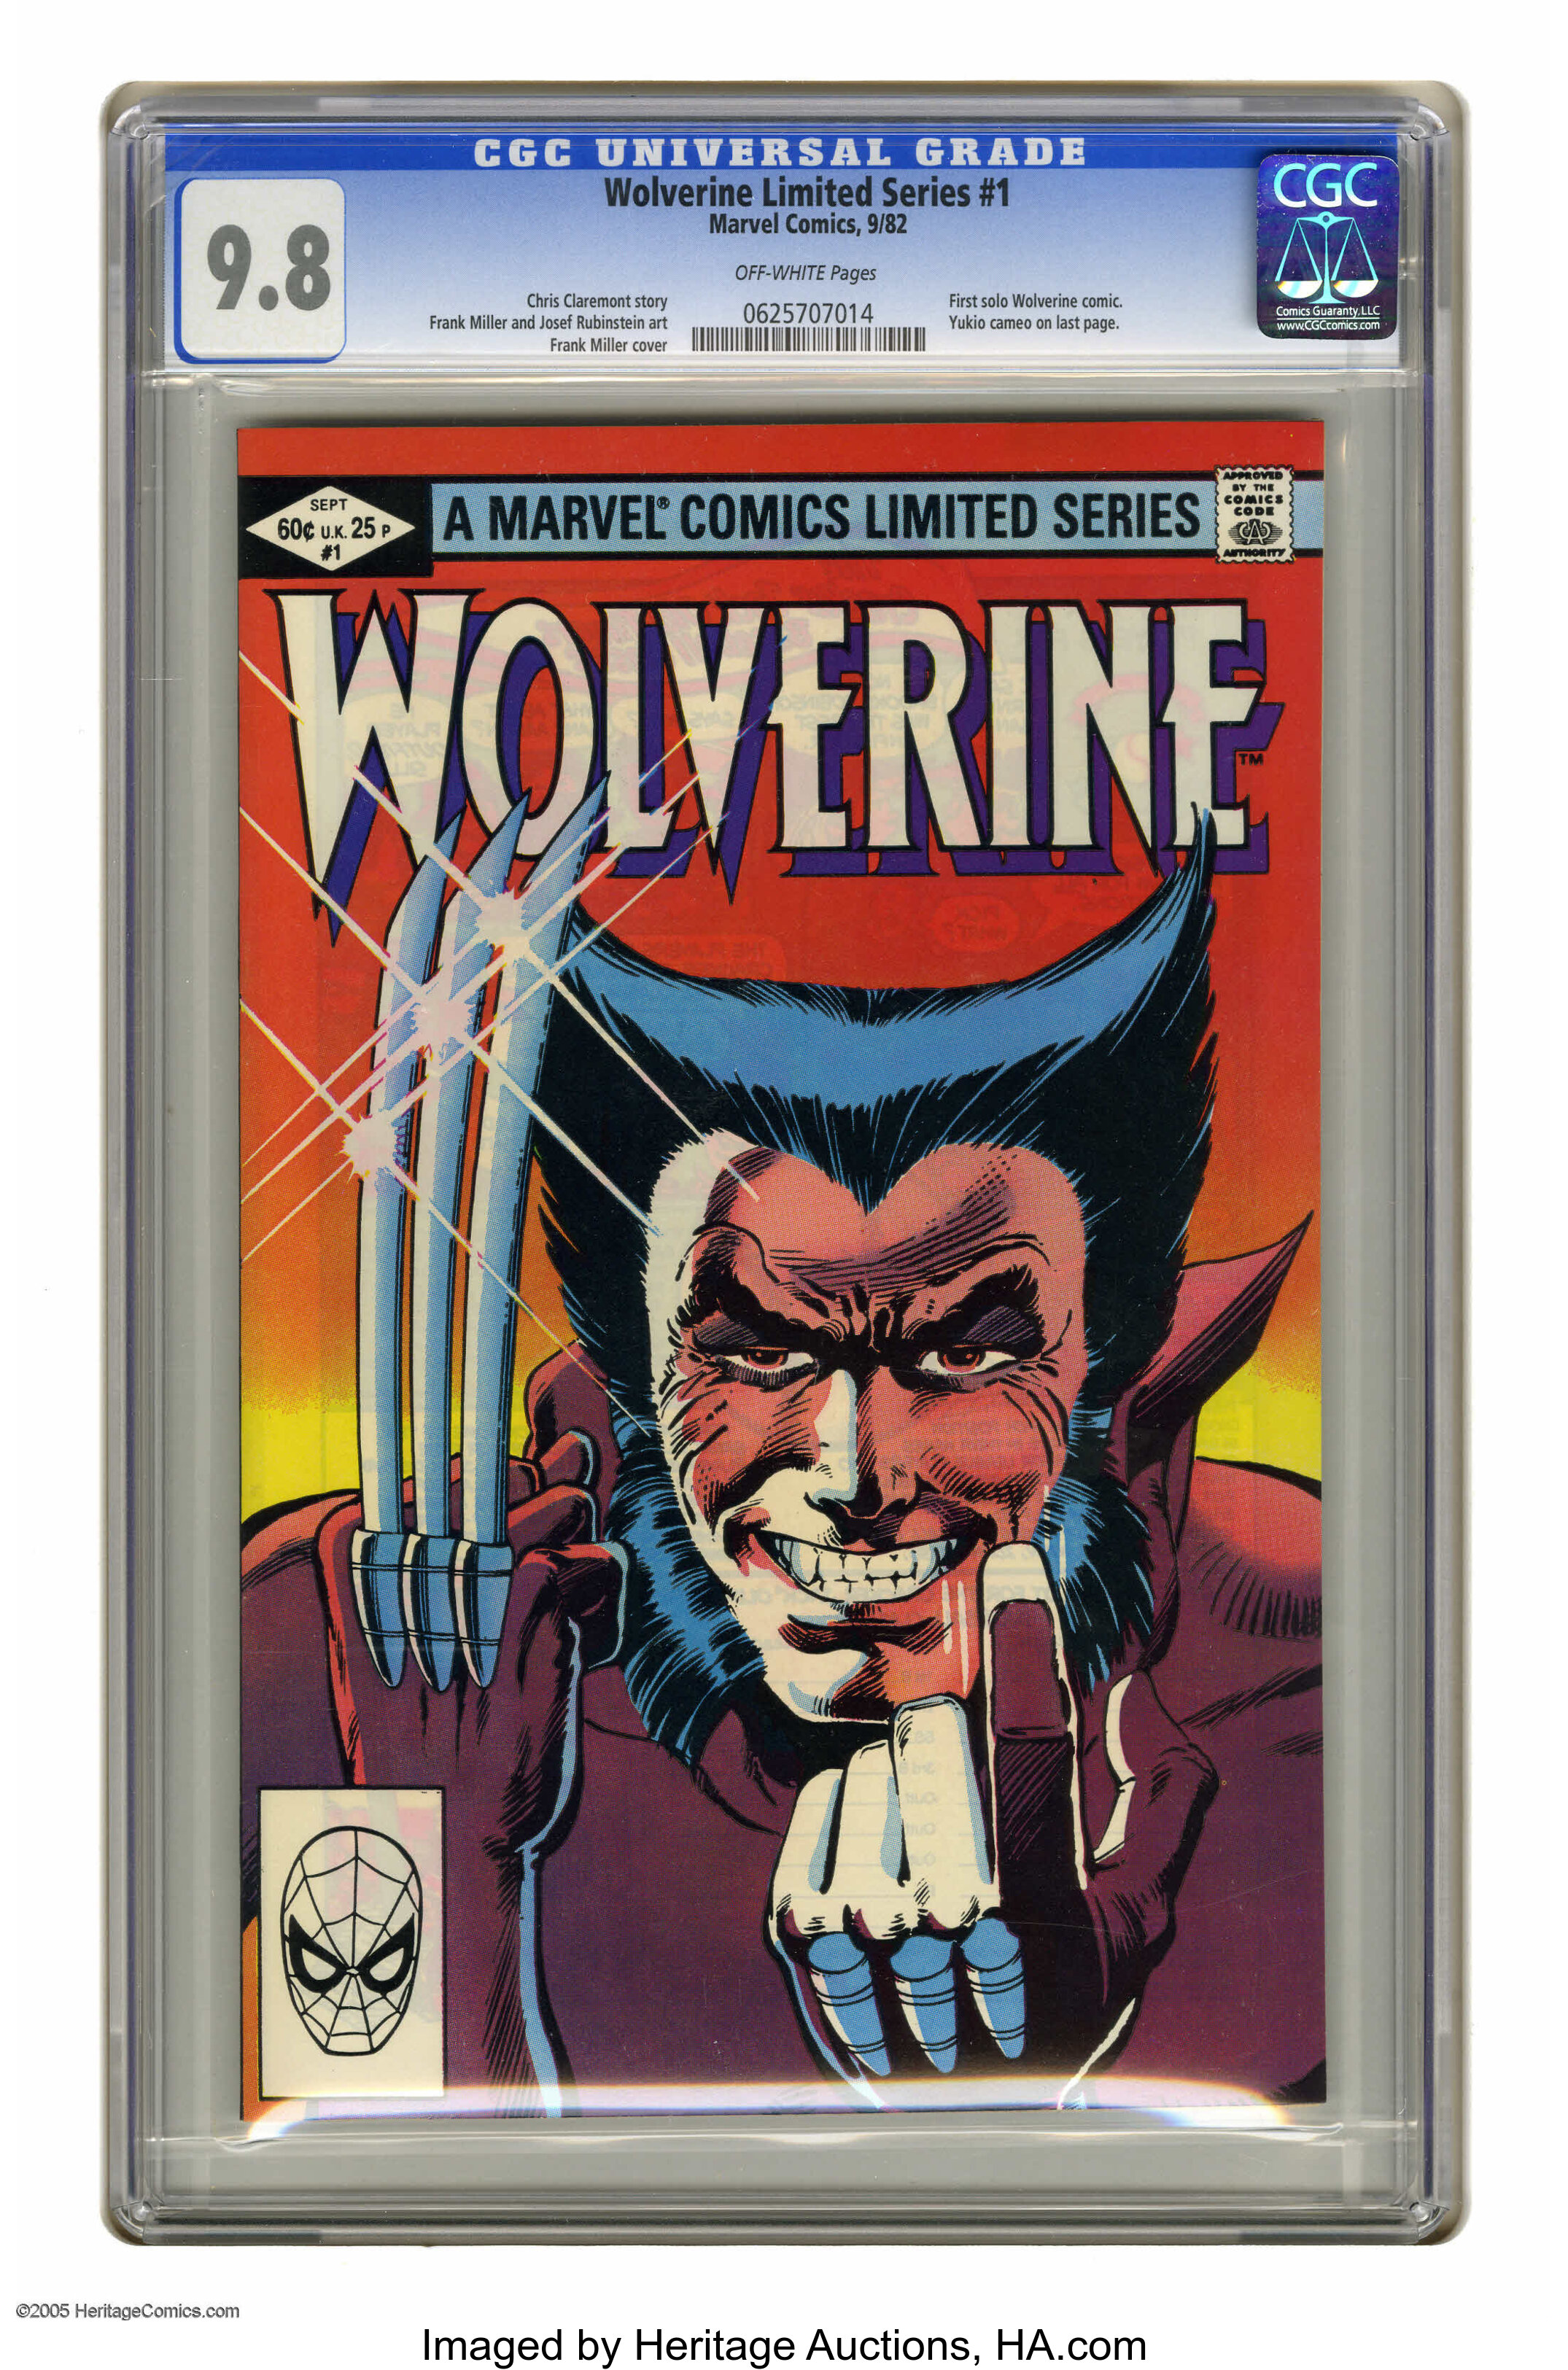 Wolverine (Limited Series) #1 (Marvel, 1982) CGC NM/MT 9.8 | Lot #16257 |  Heritage Auctions